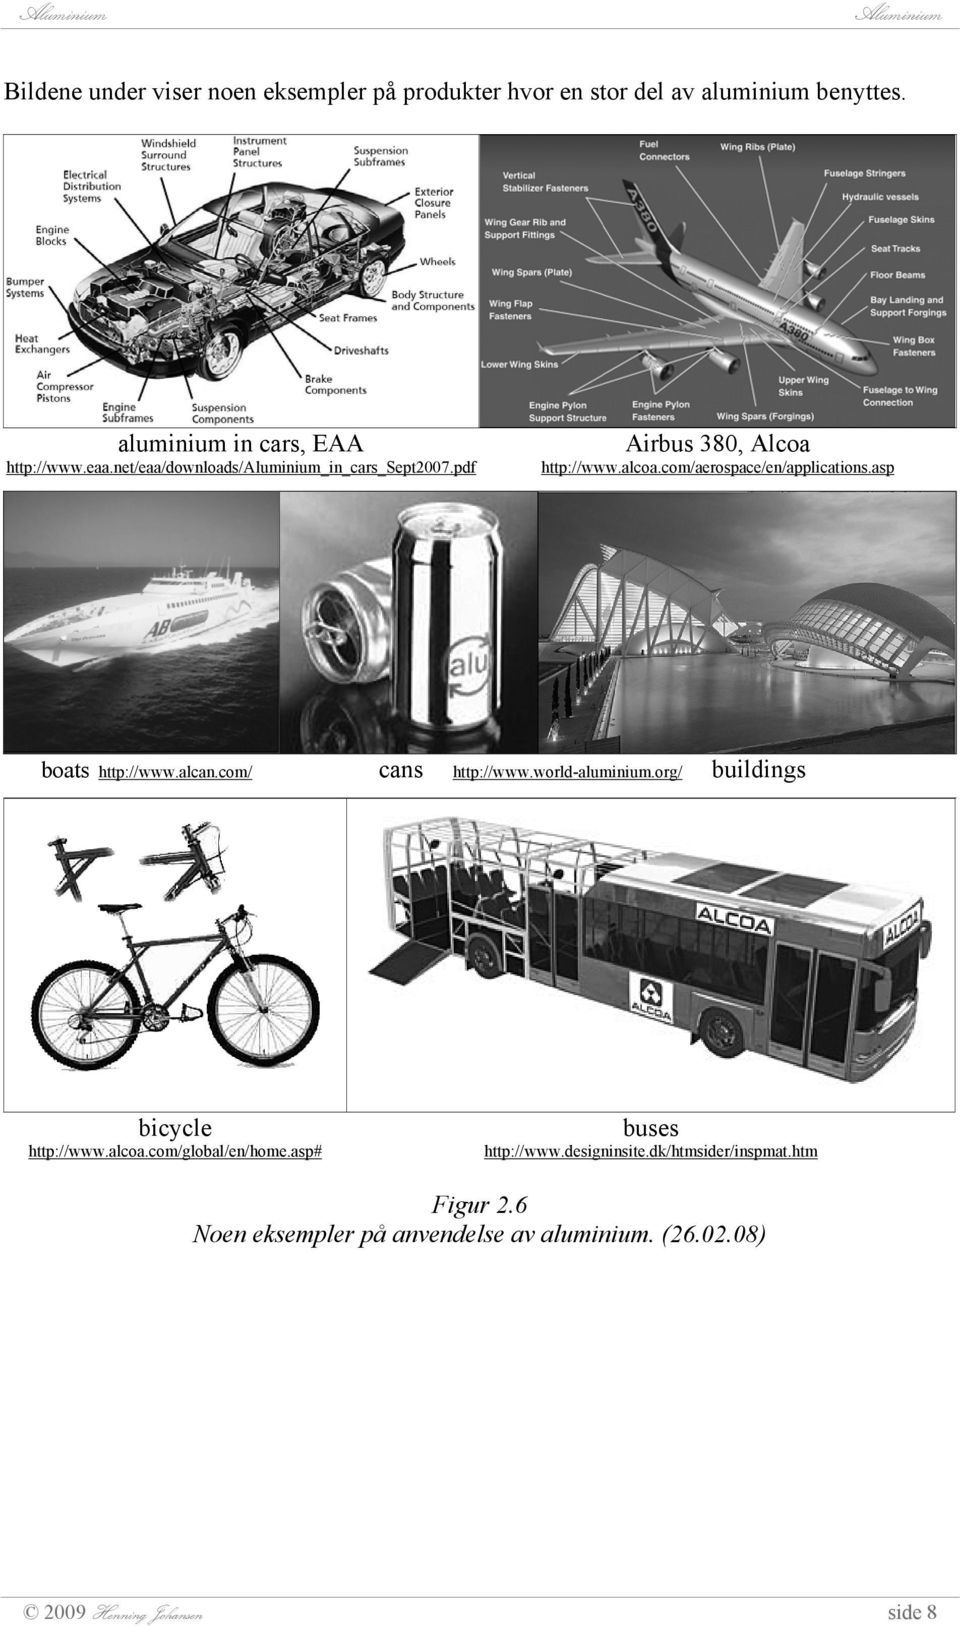 alcan.com/ cans http://www.world-aluminium.org/ buildings bicycle http://www.alcoa.com/global/en/home.asp# buses http://www.